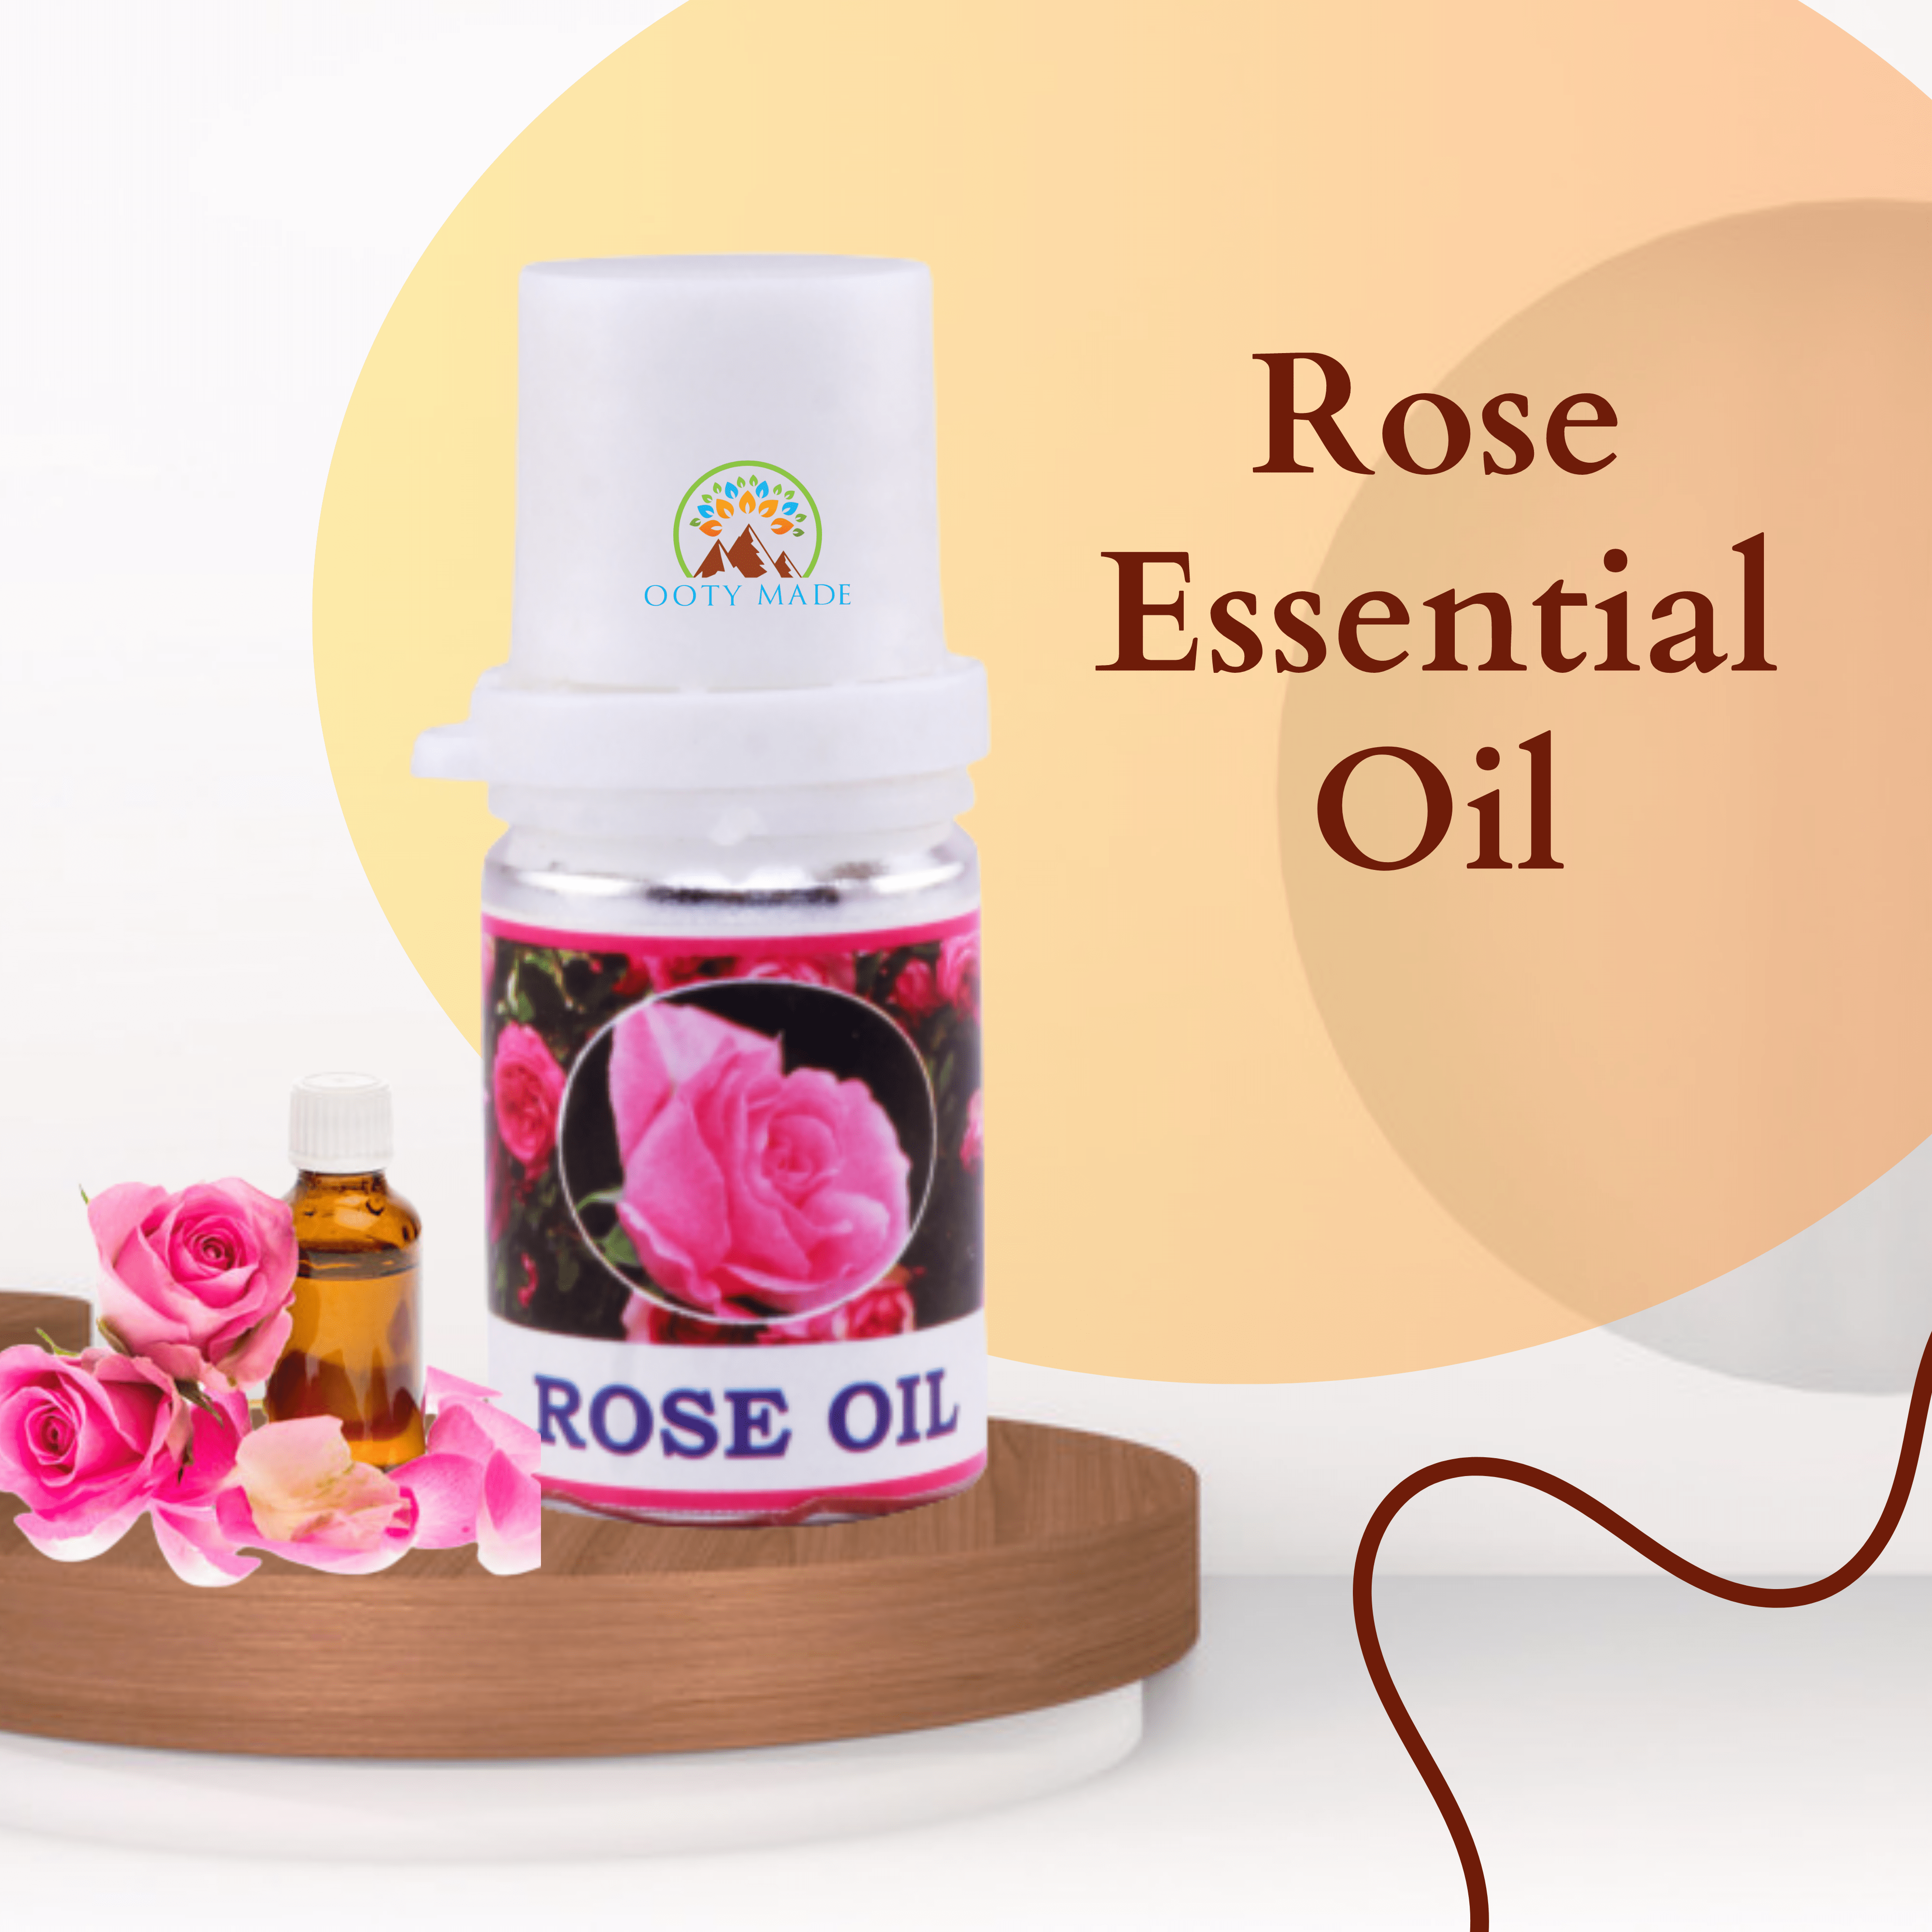 Buy rose essential oil for skin, hair, and aroma diffusers.